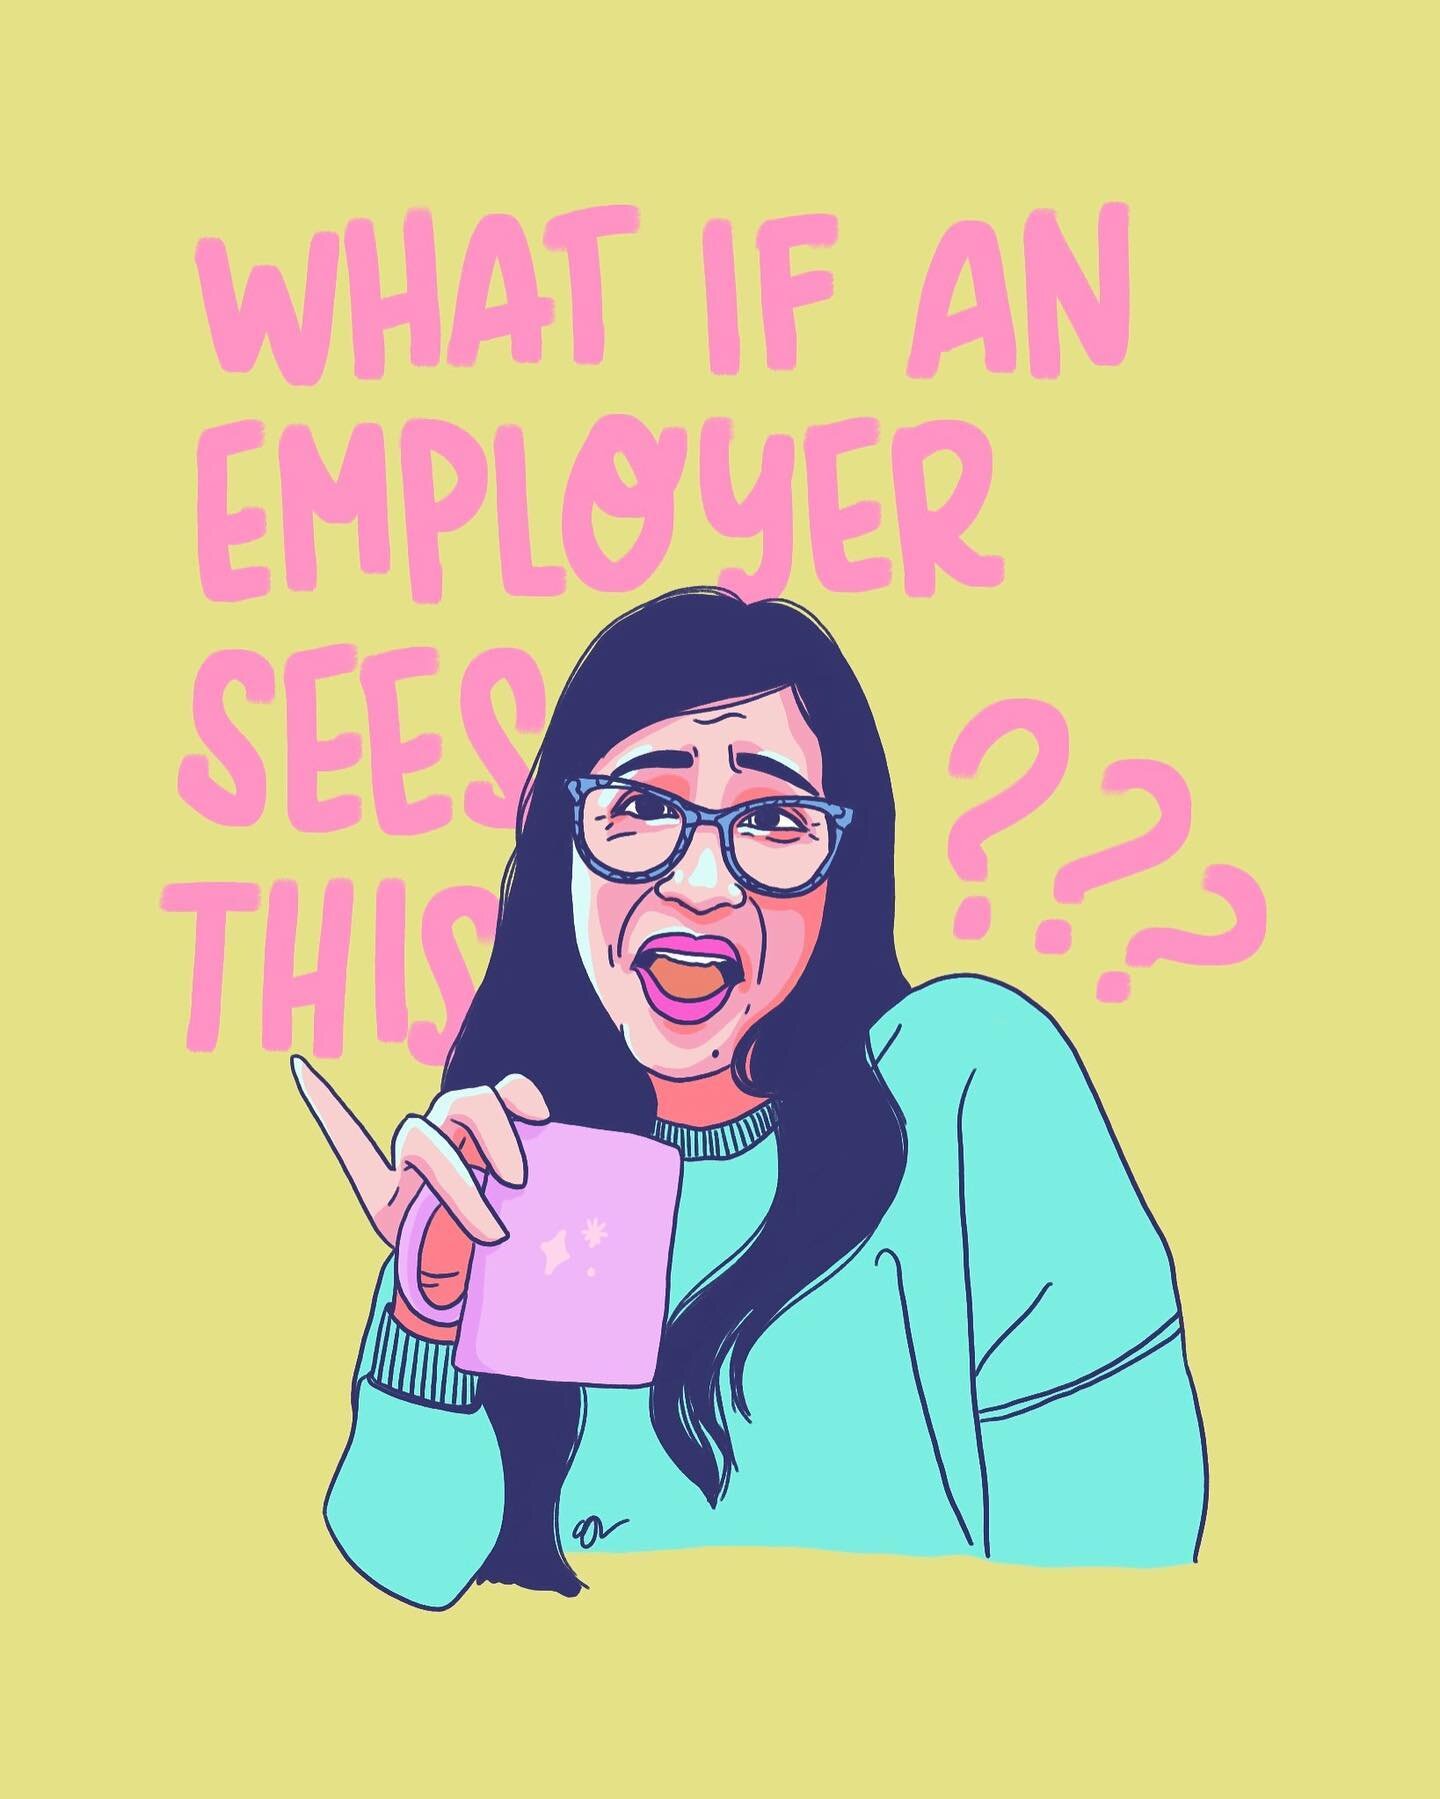 *queue DiCaprio&rsquo;s meme* Please&hellip;they don&rsquo;t even look at my LinkedIn even though its required on almost all of the applications I&rsquo;ve come across! 😂

But seriously, why would I be ashamed to share these illustrations? I&rsquo;m